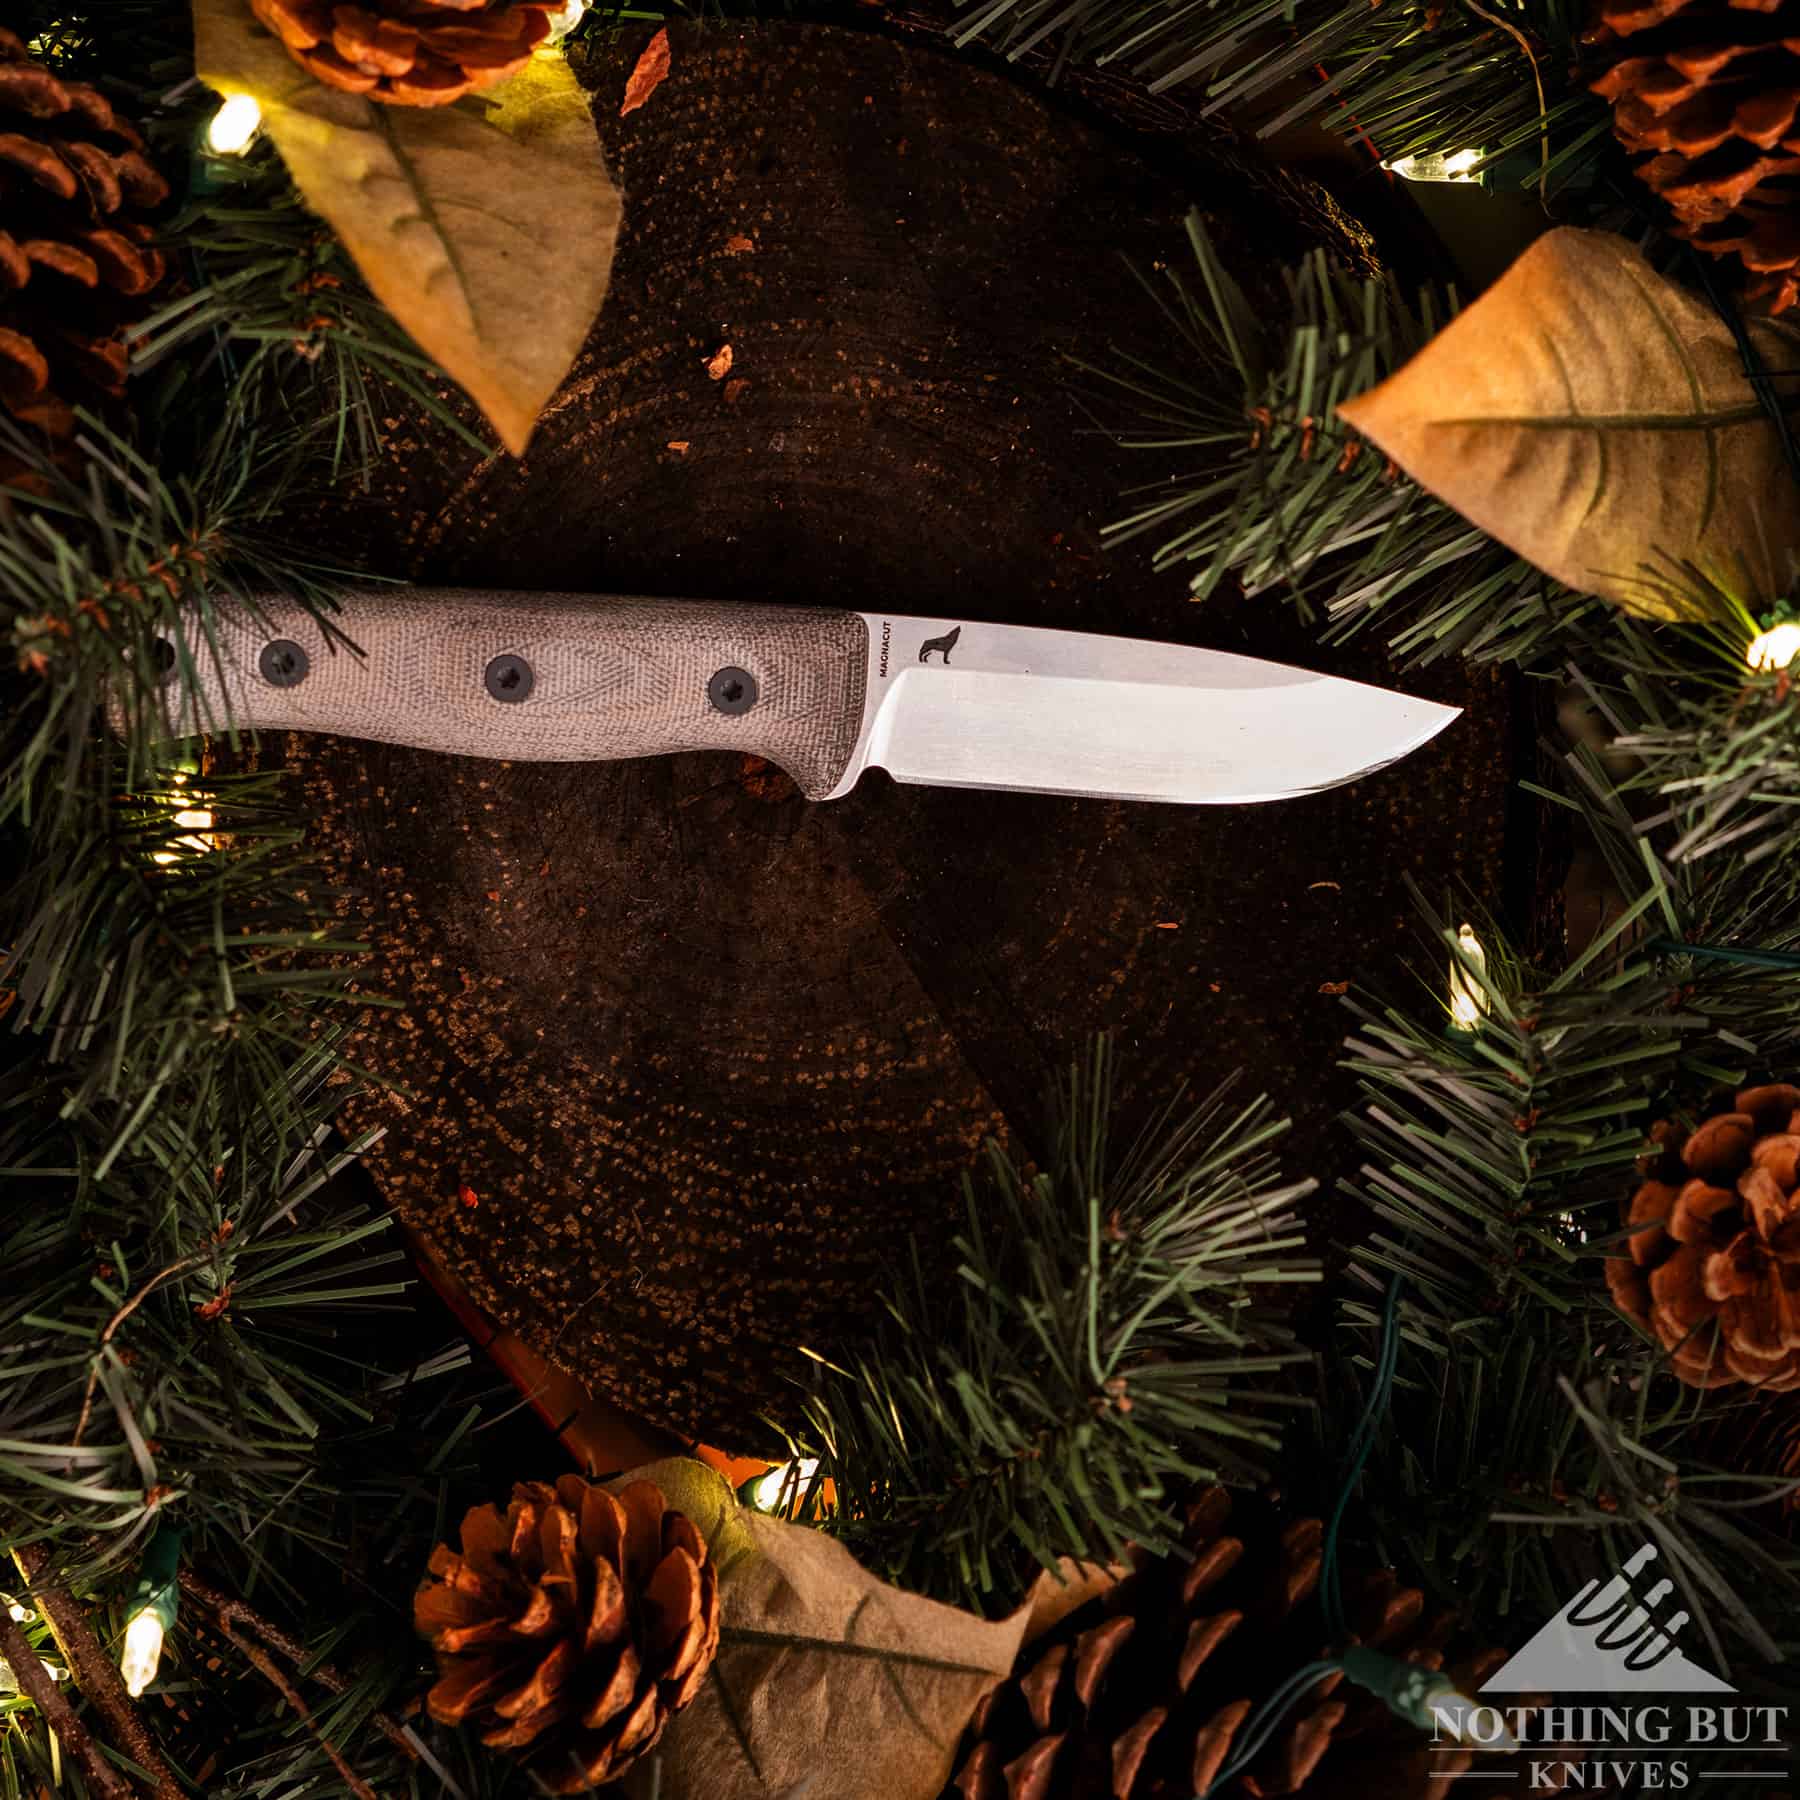 The Reiff F4 bushcraft knife decked out for the holidays. 